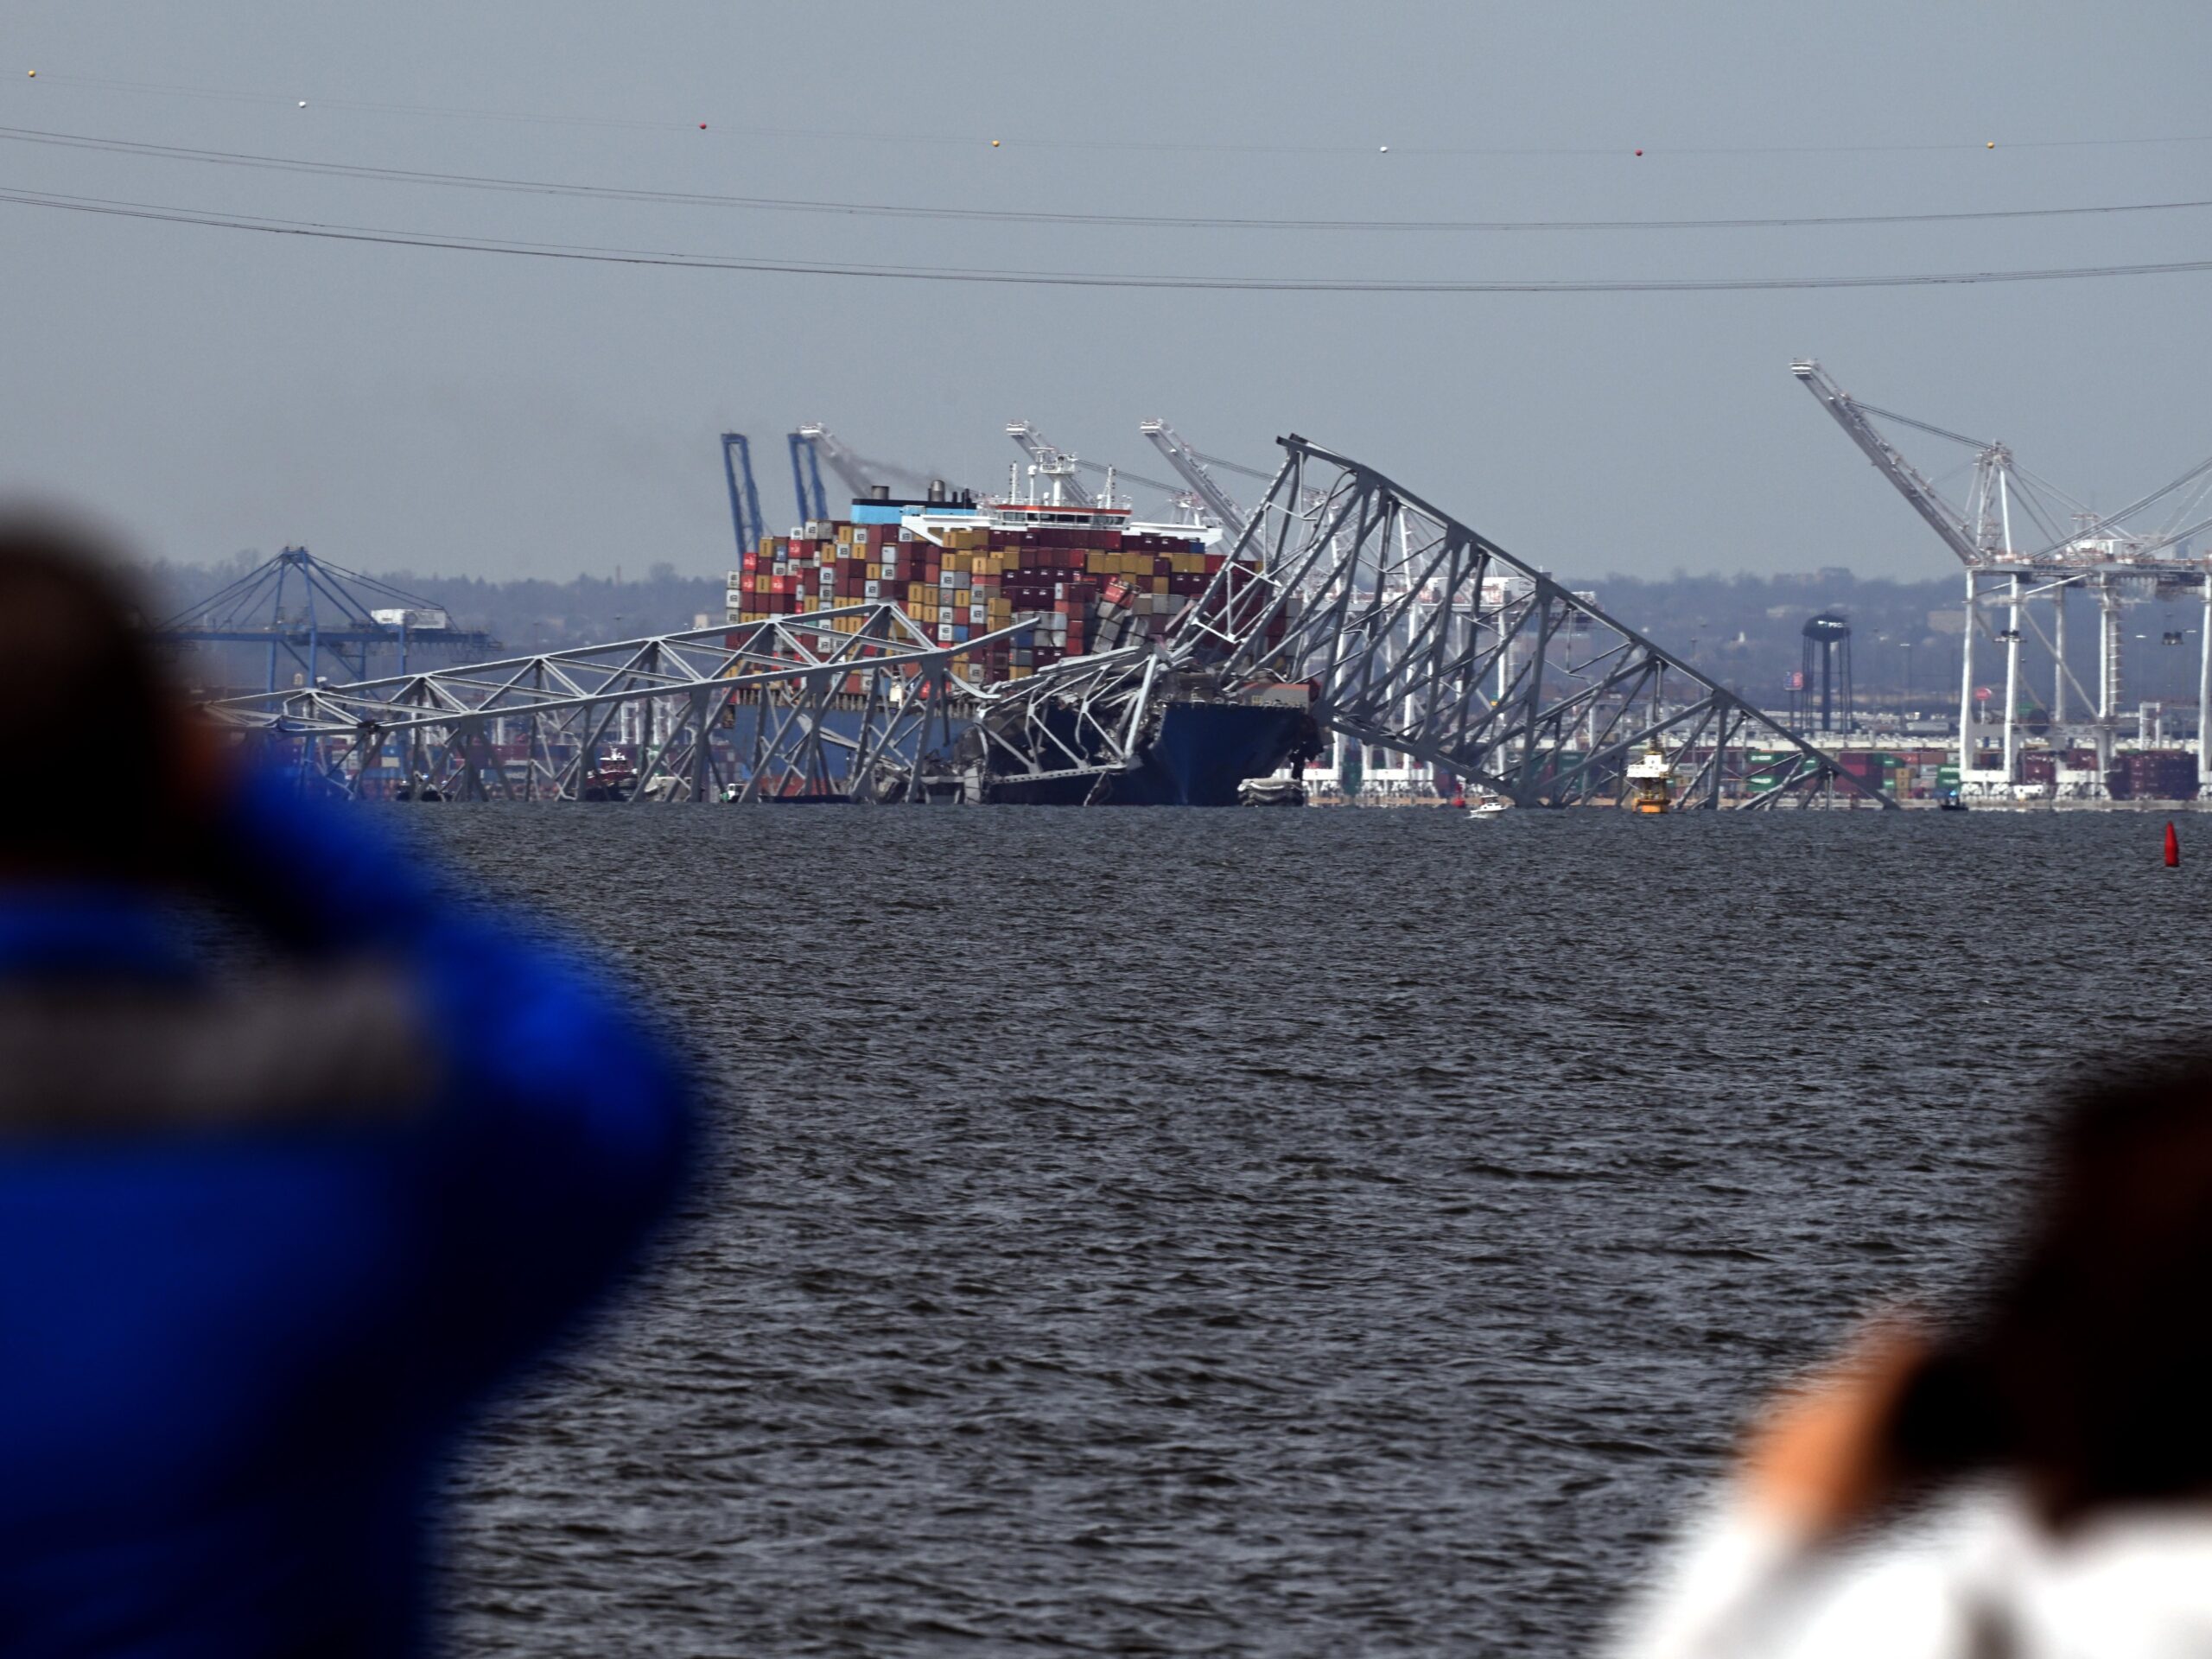 Francis Scott Key Bridge collapsed after being hit by the Dali container vessel, as seen from Riviera Beach, Md., on Tuesday.